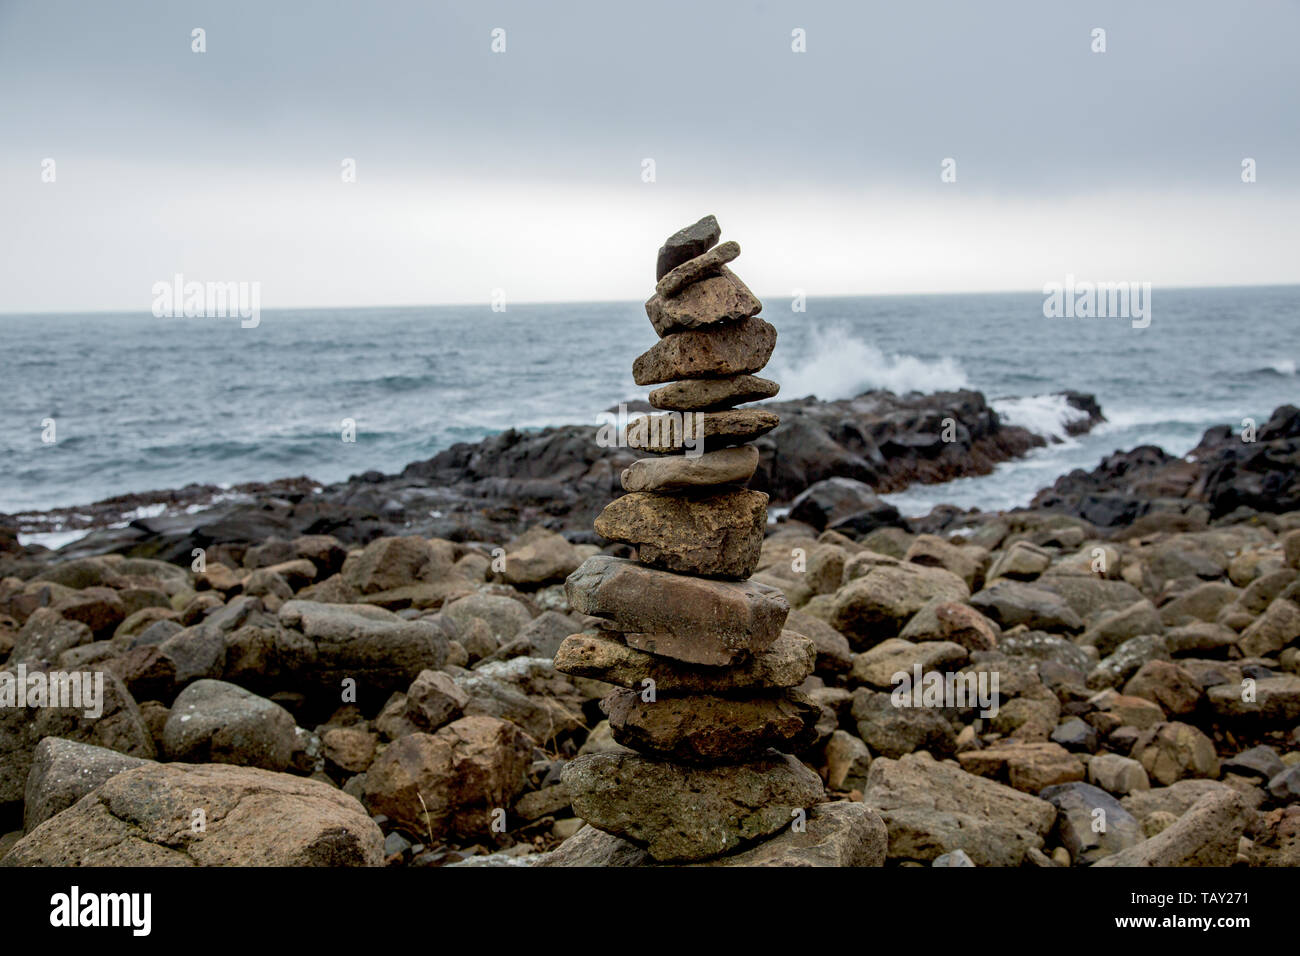 Cairn in front of coastal landscape at stormy weather in Iceland Stock Photo